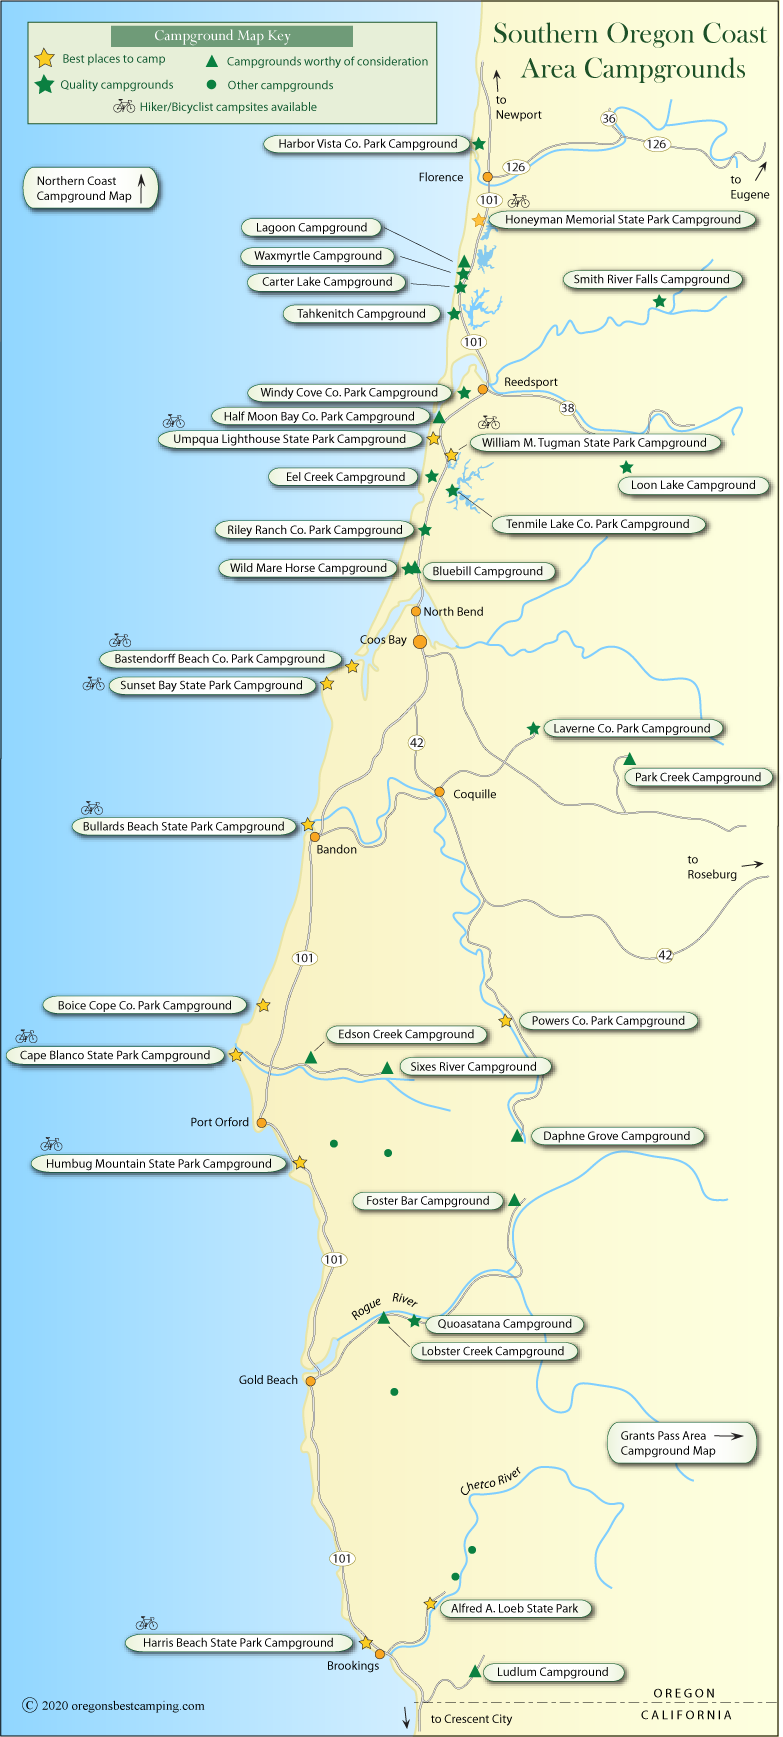 map of campgrounds along the southern half of the Oregon coast